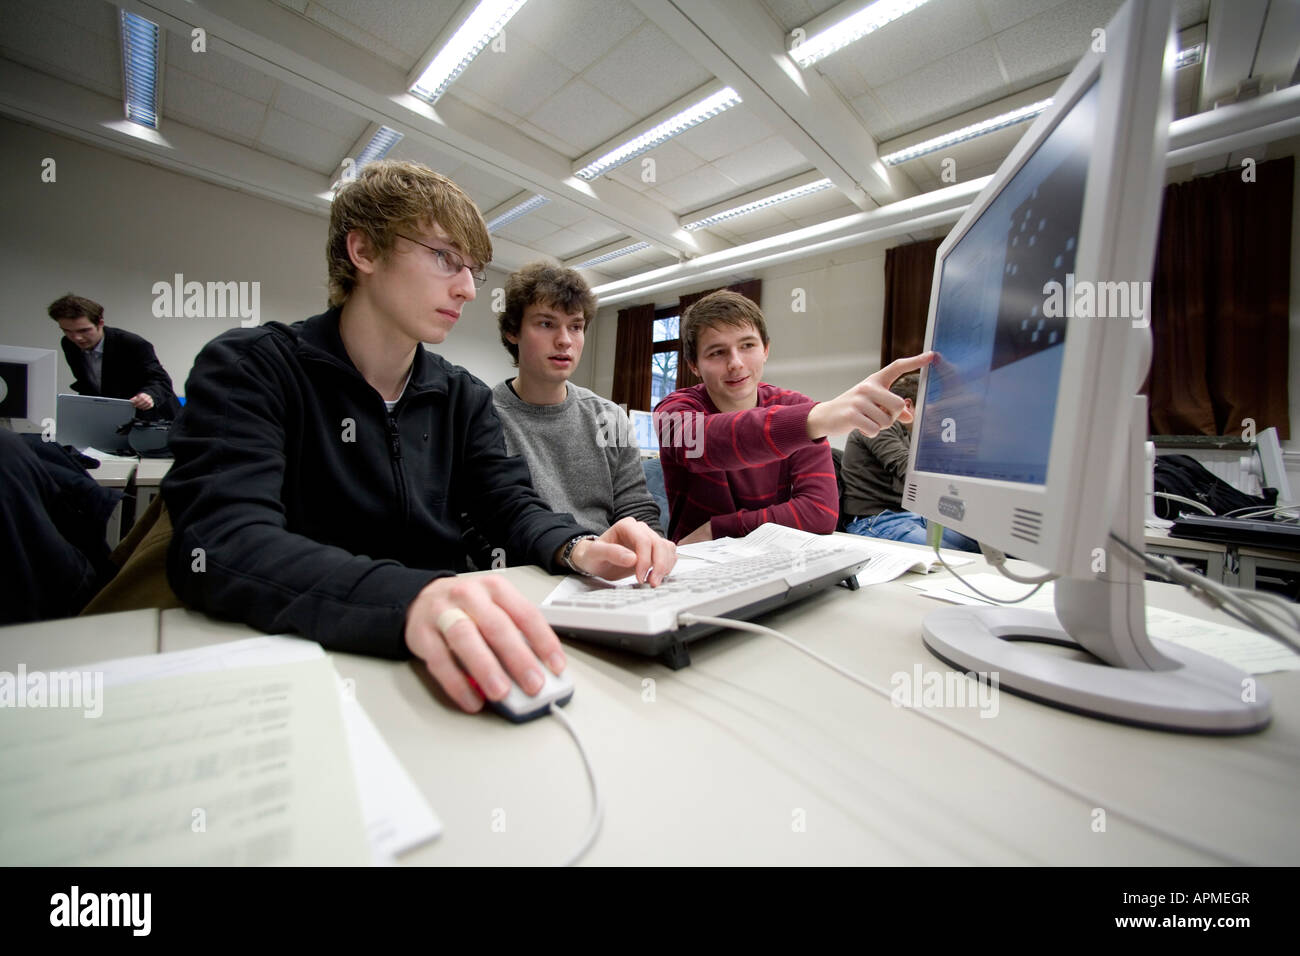 Study of information technology at the University of Hamburg Students during a tutorial at modern computers HAMBURG GERMANY 29 0 Stock Photo